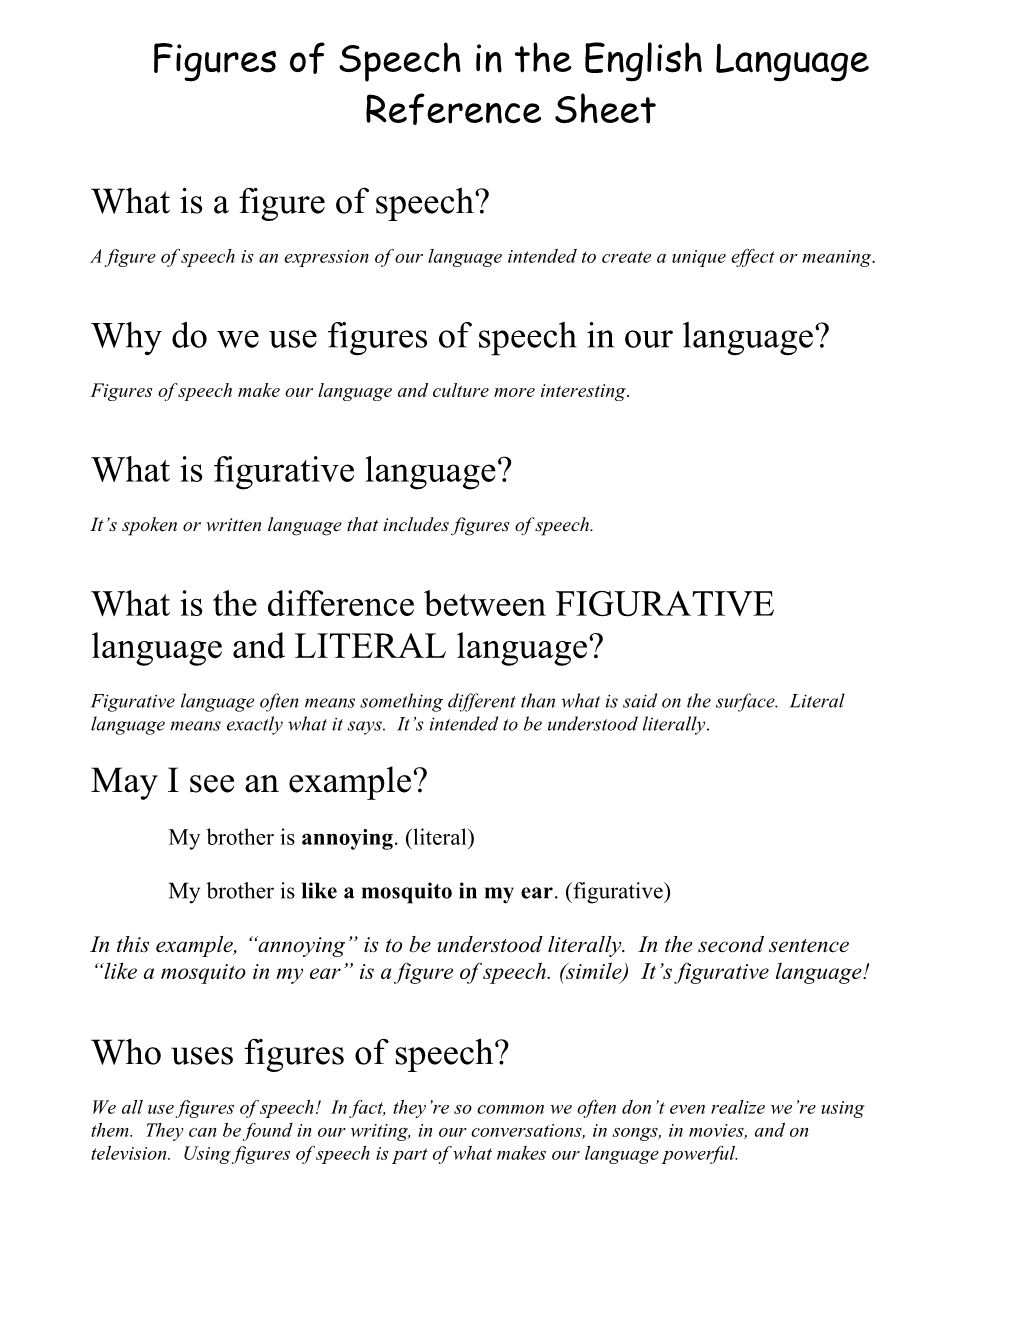 Figures of Speech in the English Language